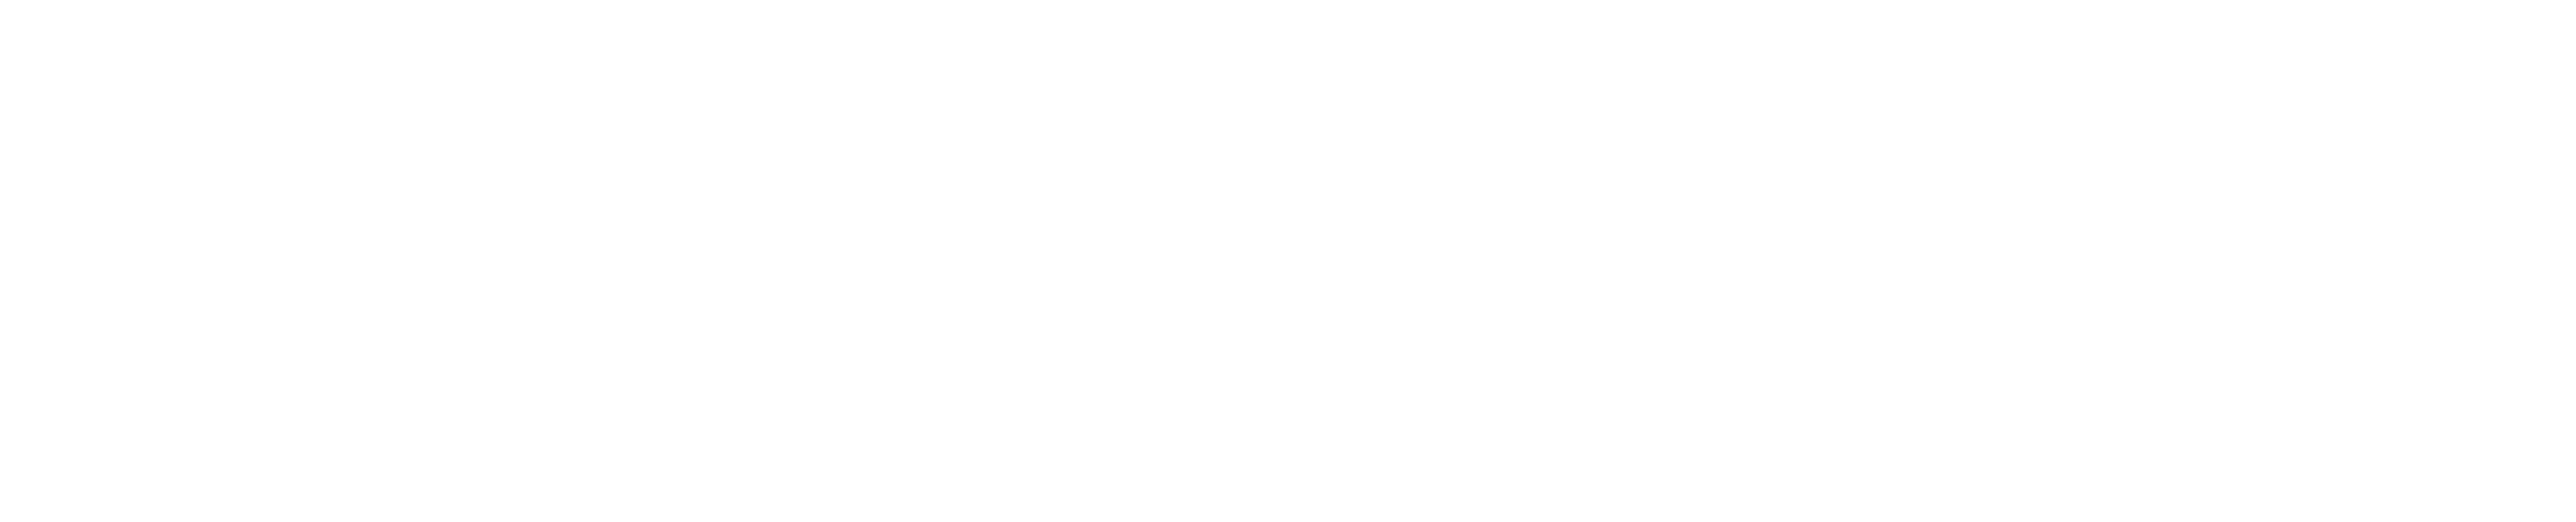 Contact Tim Day Construction Ltd.